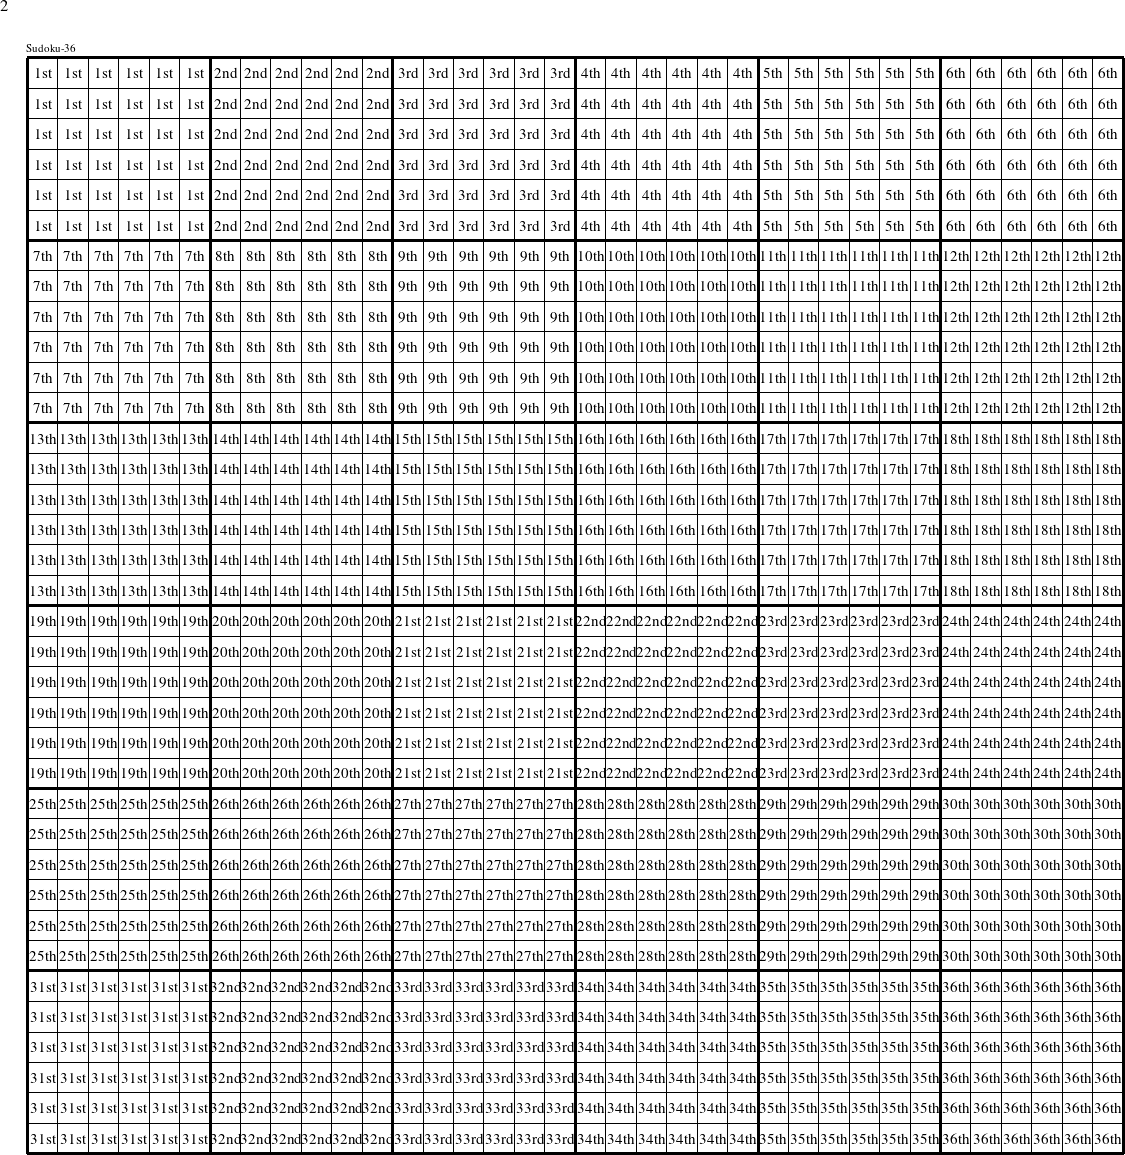 Each 6x6 square is a group numbered as shown in this Sudoku-36 figure.